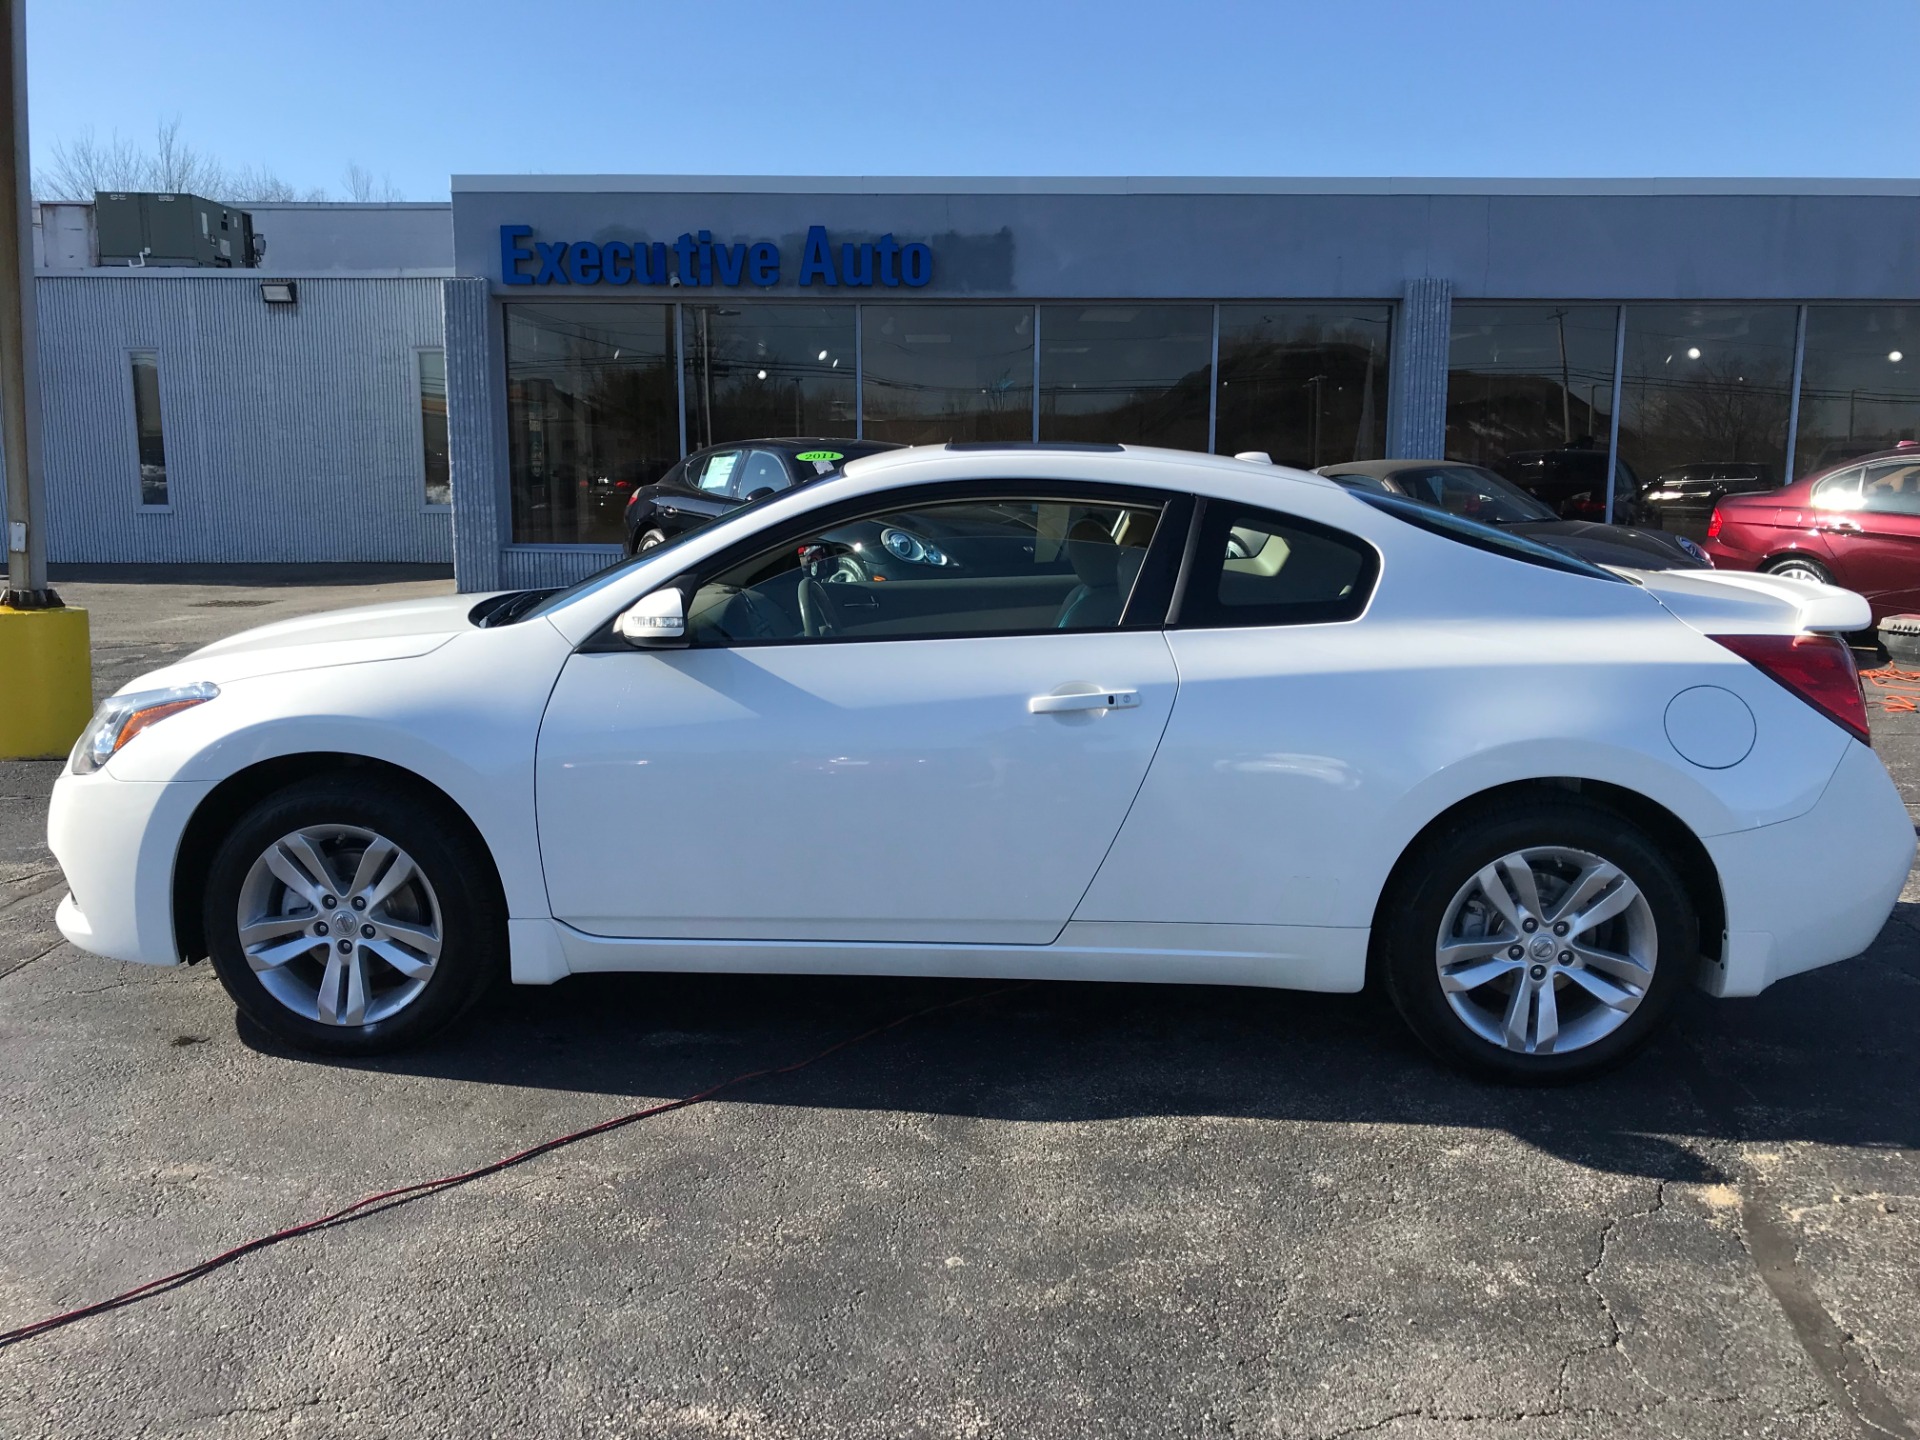 Used 2012 Nissan Altima S For Sale 10 900 Executive